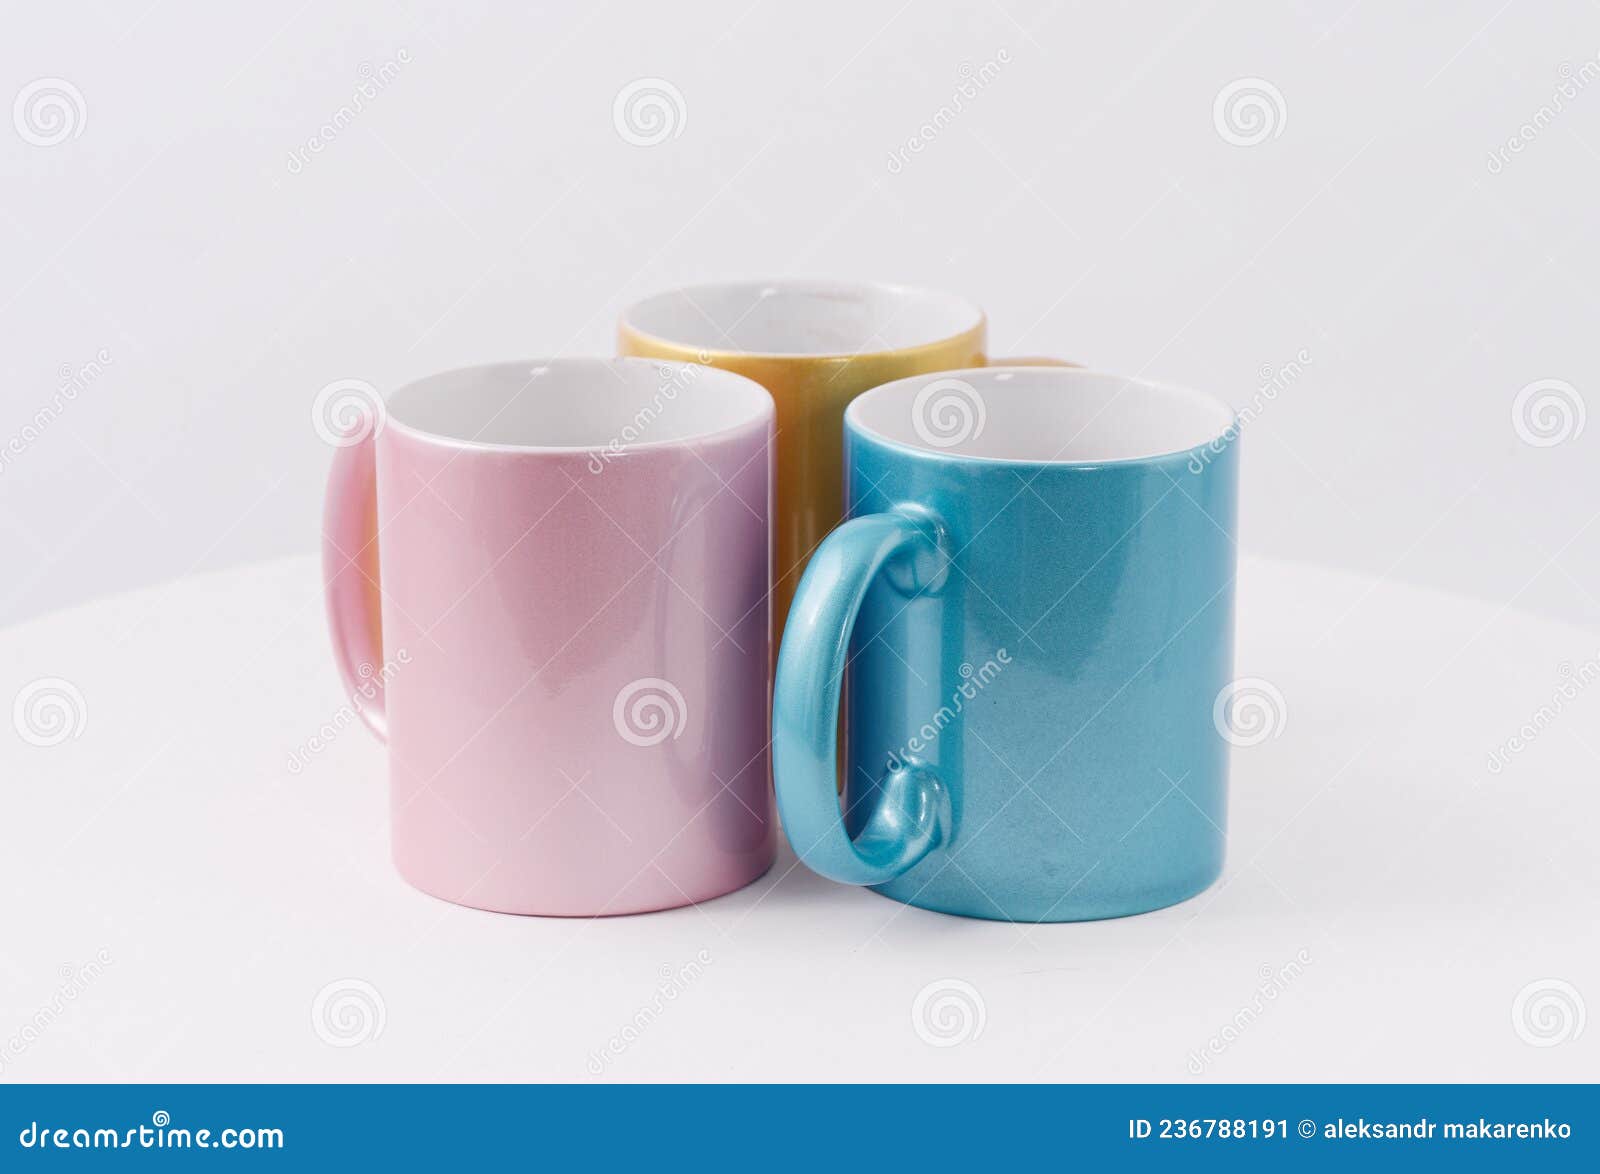 https://thumbs.dreamstime.com/z/colored-cups-sublimation-printing-isolated-white-background-236788191.jpg